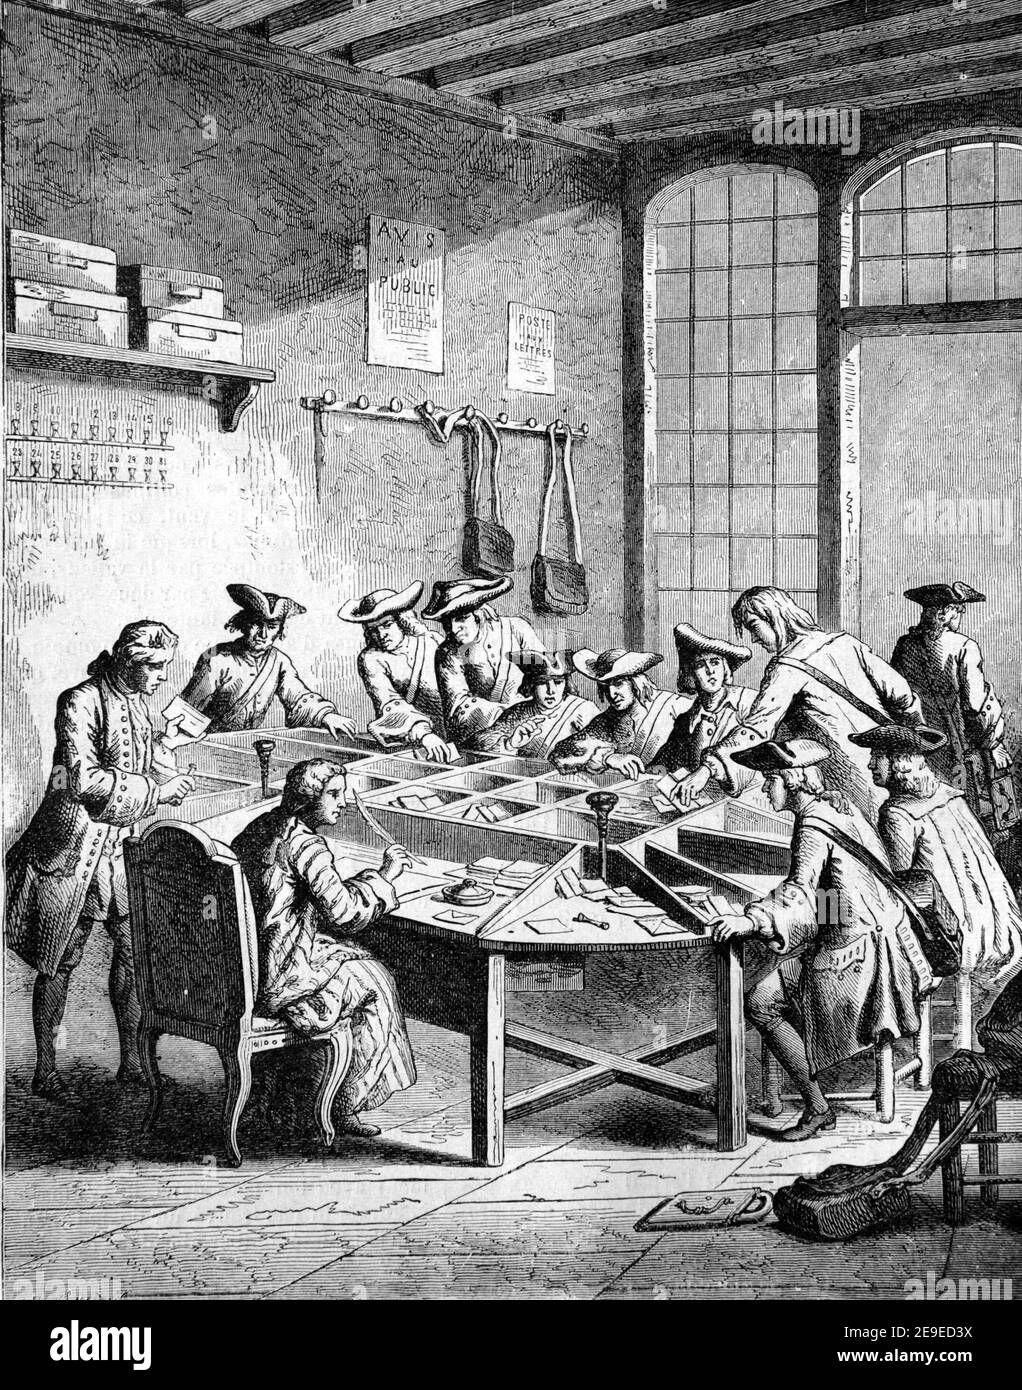 French Postal Letter Sorting Office or Post Office during Reign of Louis XV. Vintage Illustration or Engraving Stock Photo